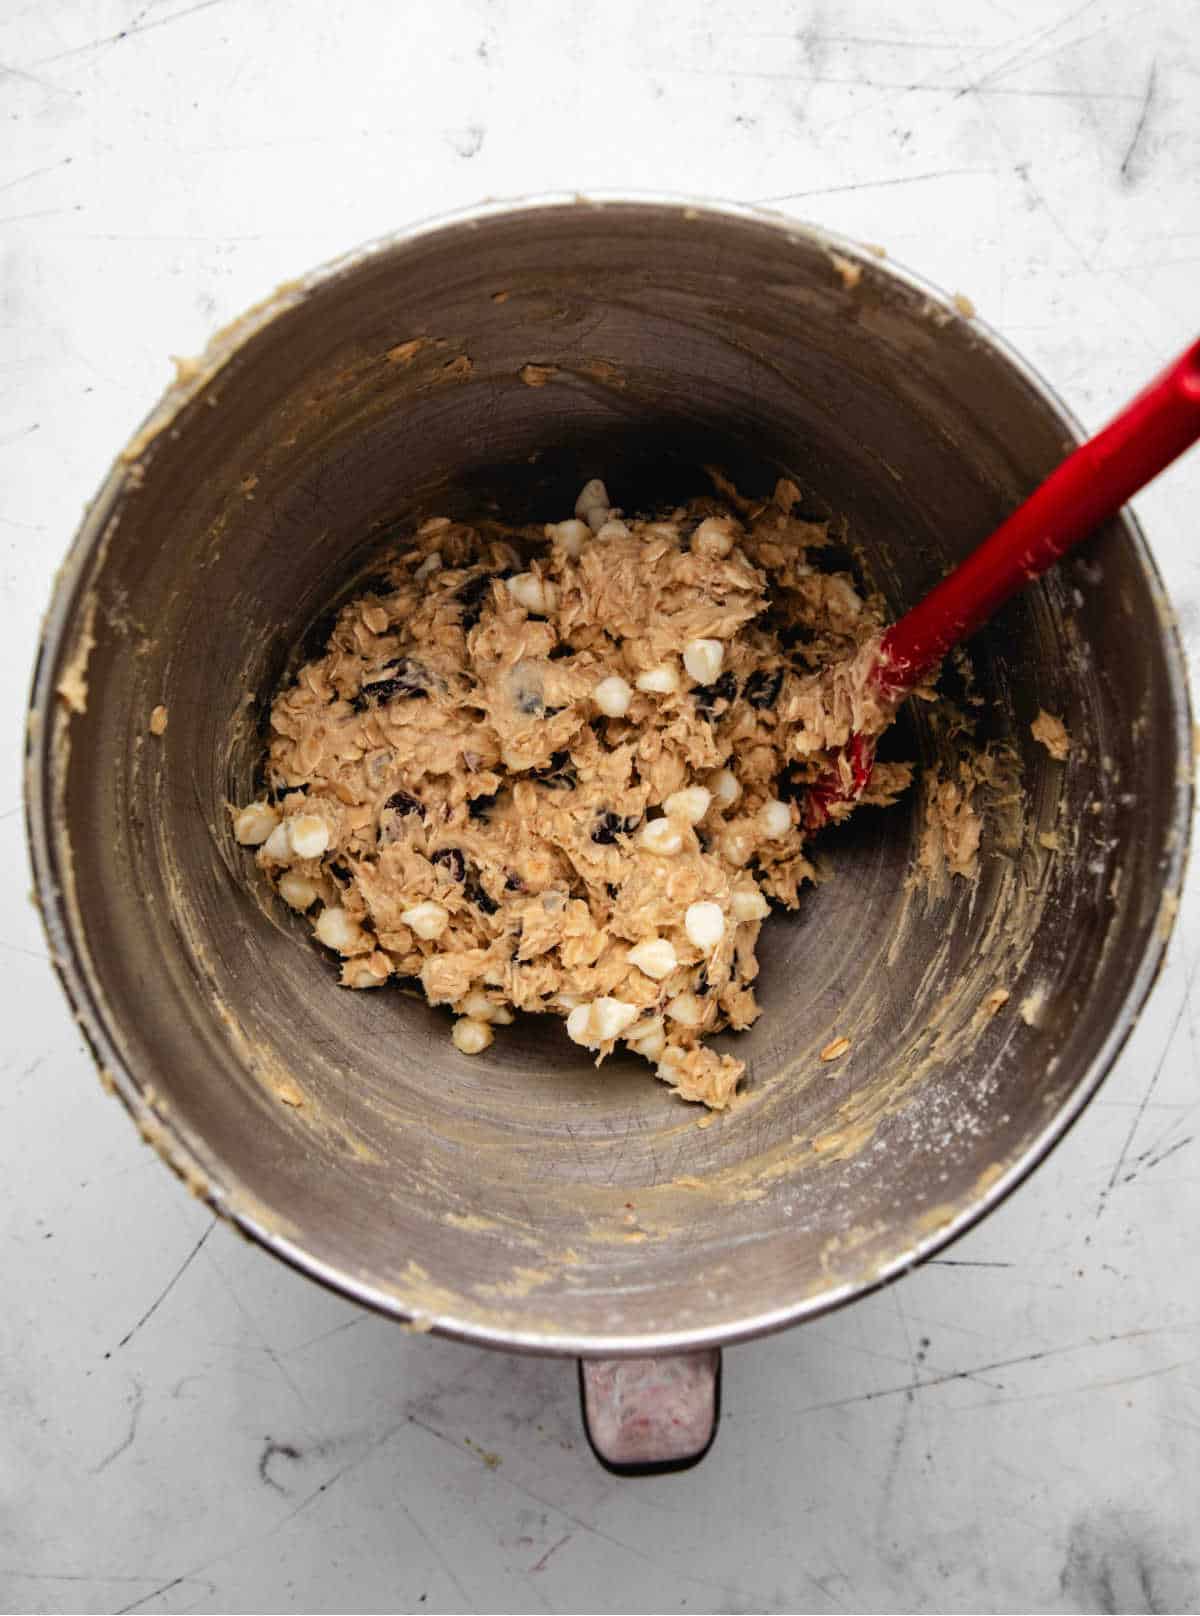 Dried cranberries and white chocolate chips stirred into oatmeal cookie dough.